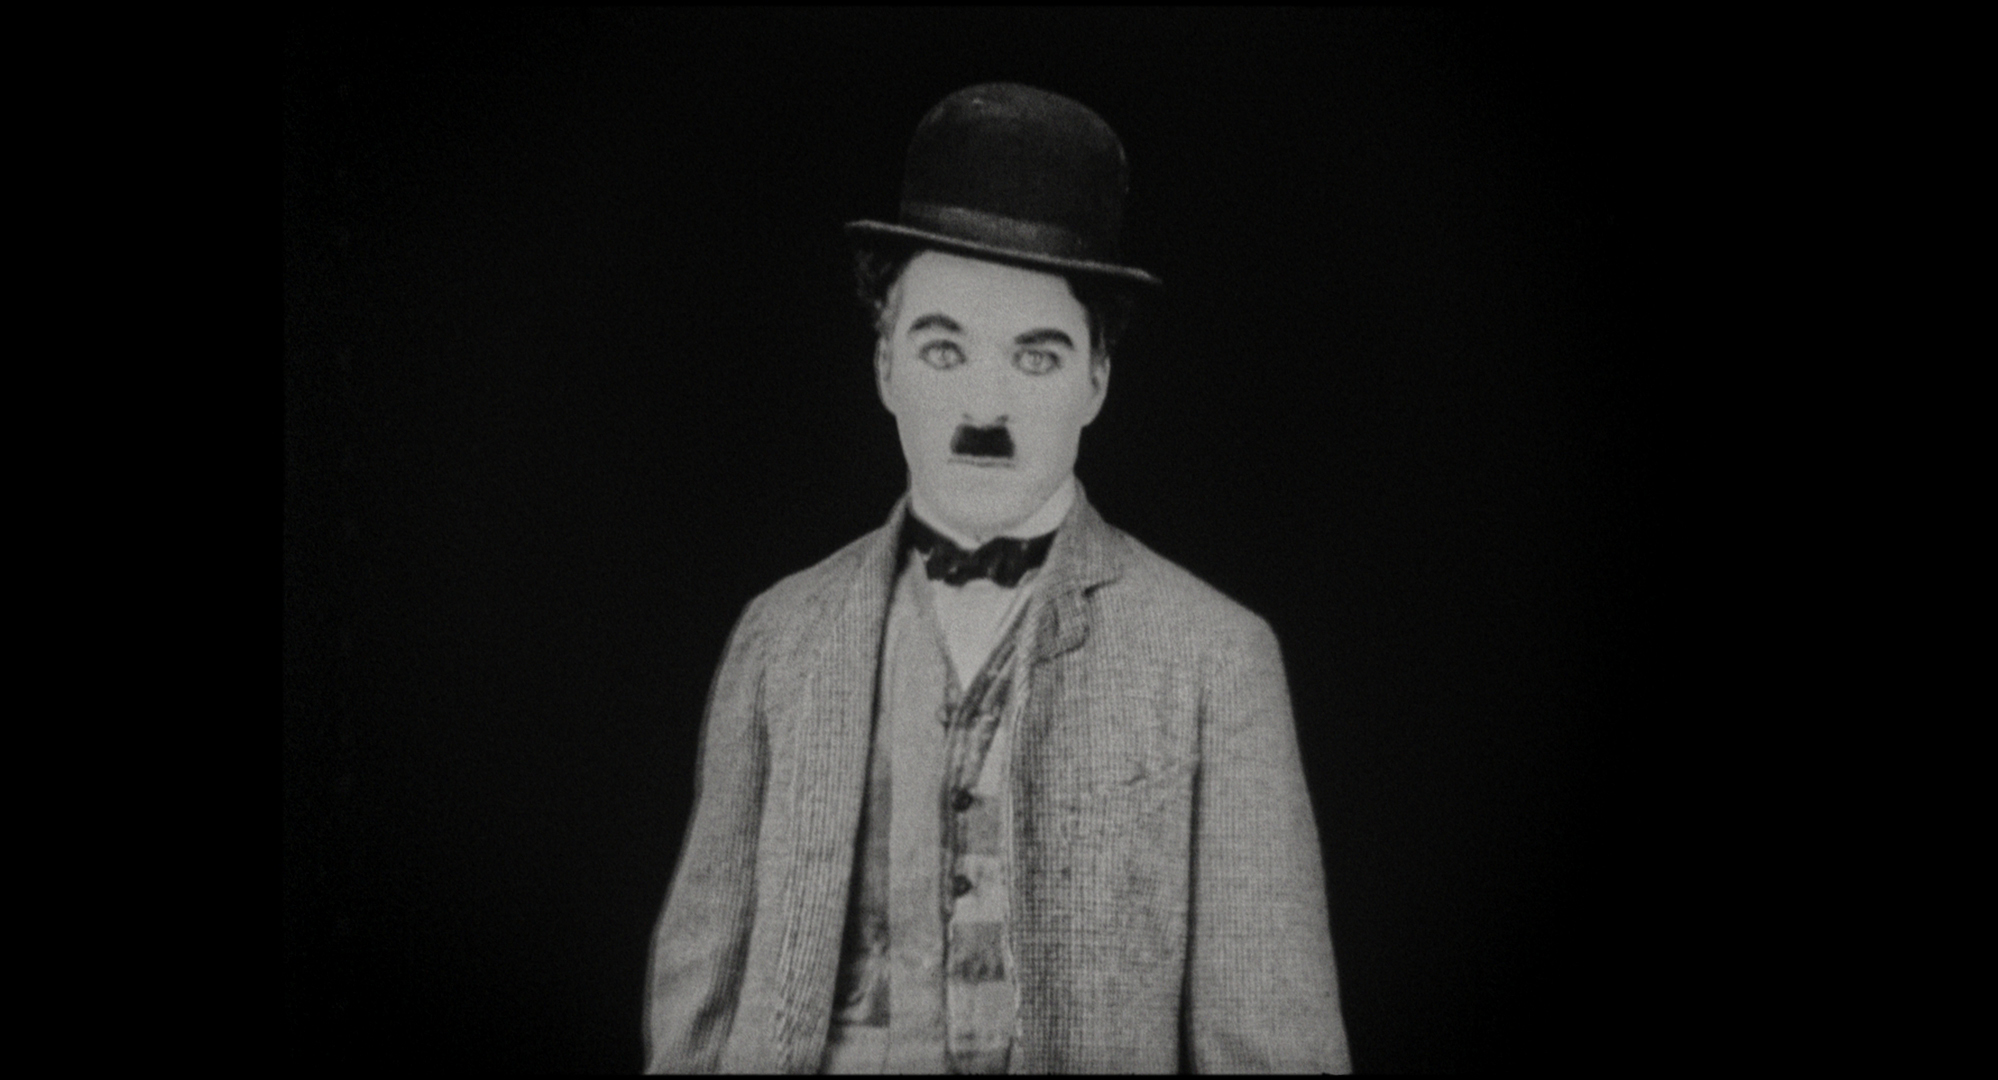 The Real Charlie Chaplin + The Great Dictator (1940)